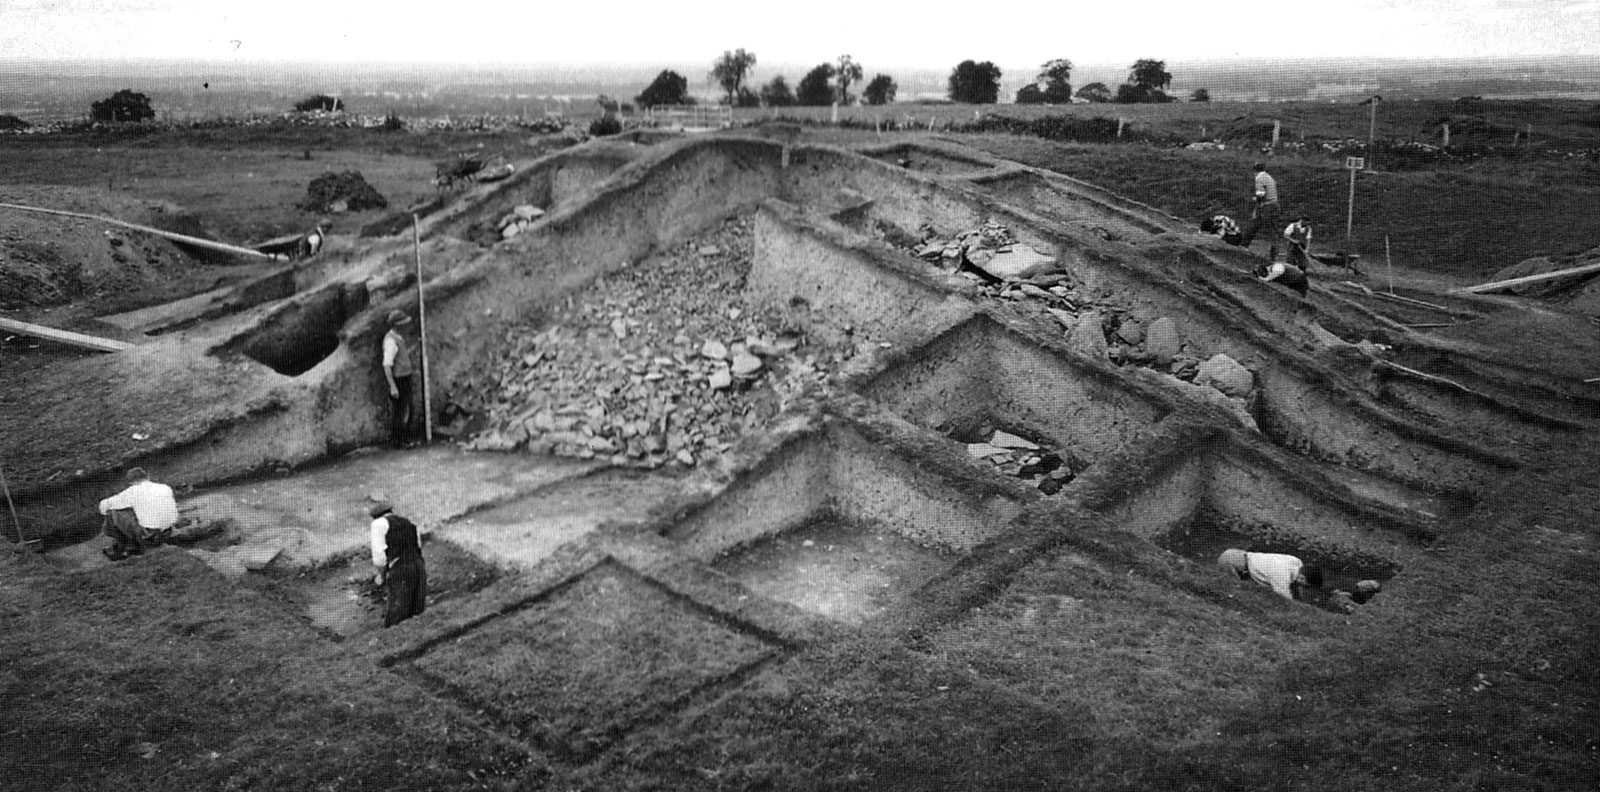 Excavations underway at the Mound of the Hostages in  1955.